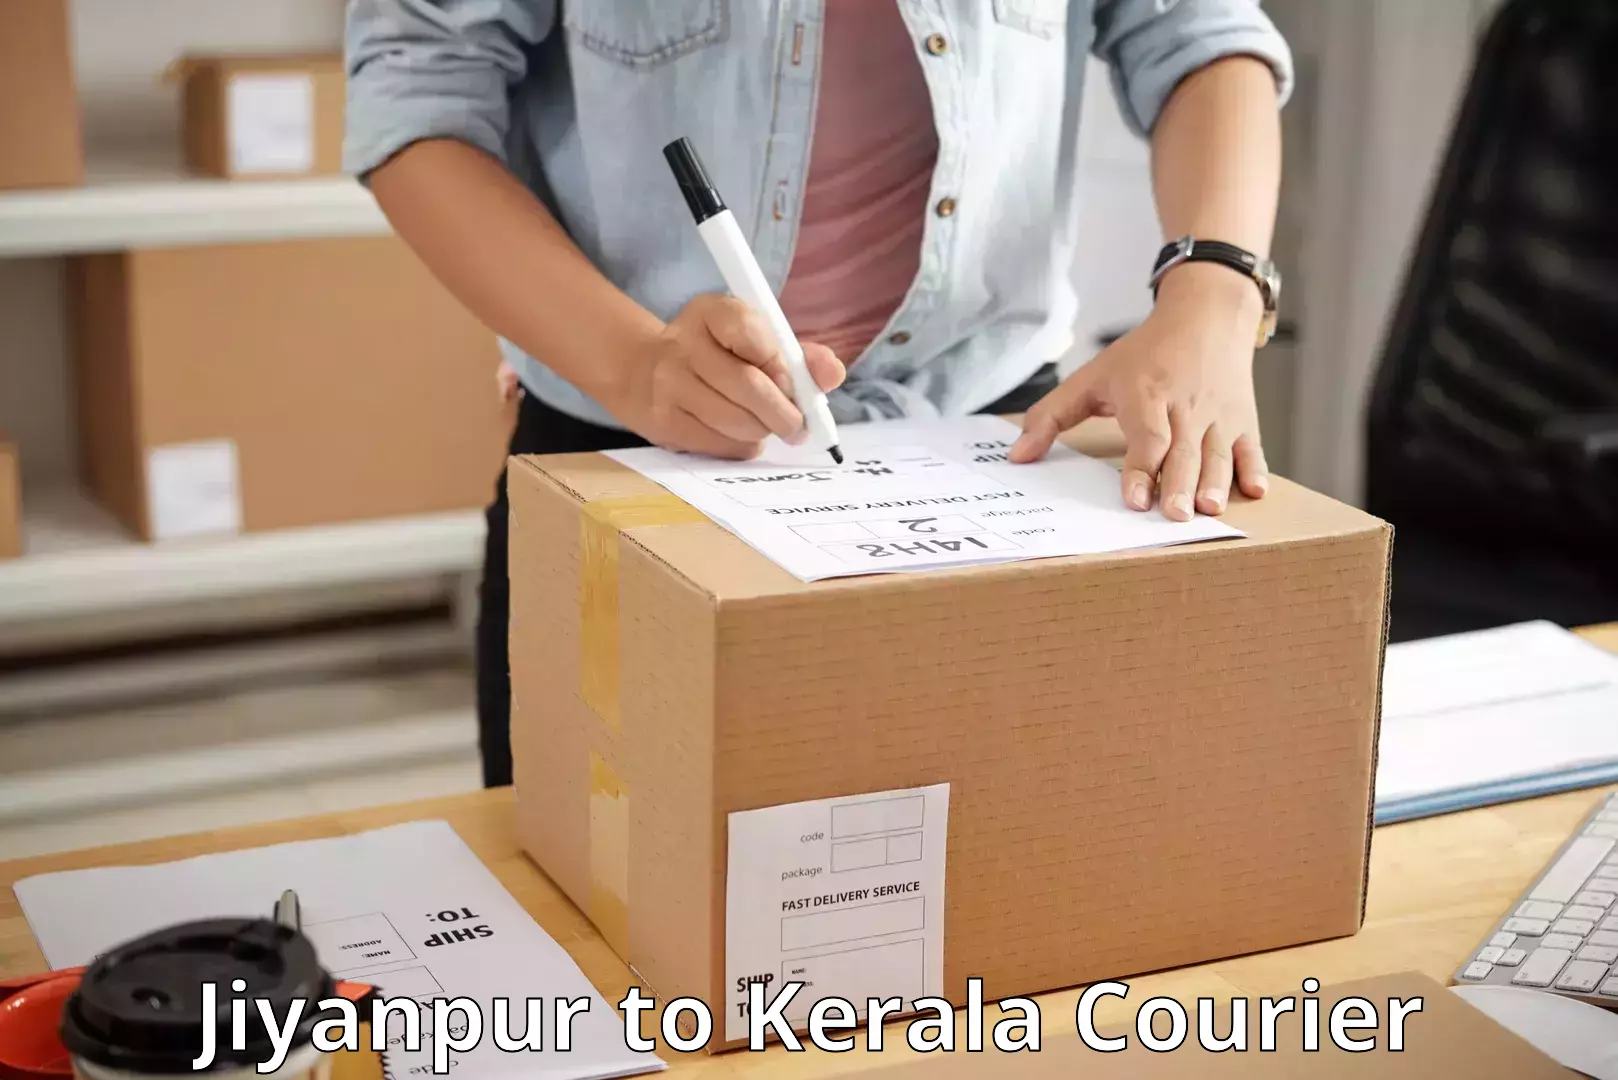 Round-the-clock parcel delivery Jiyanpur to Kozhikode